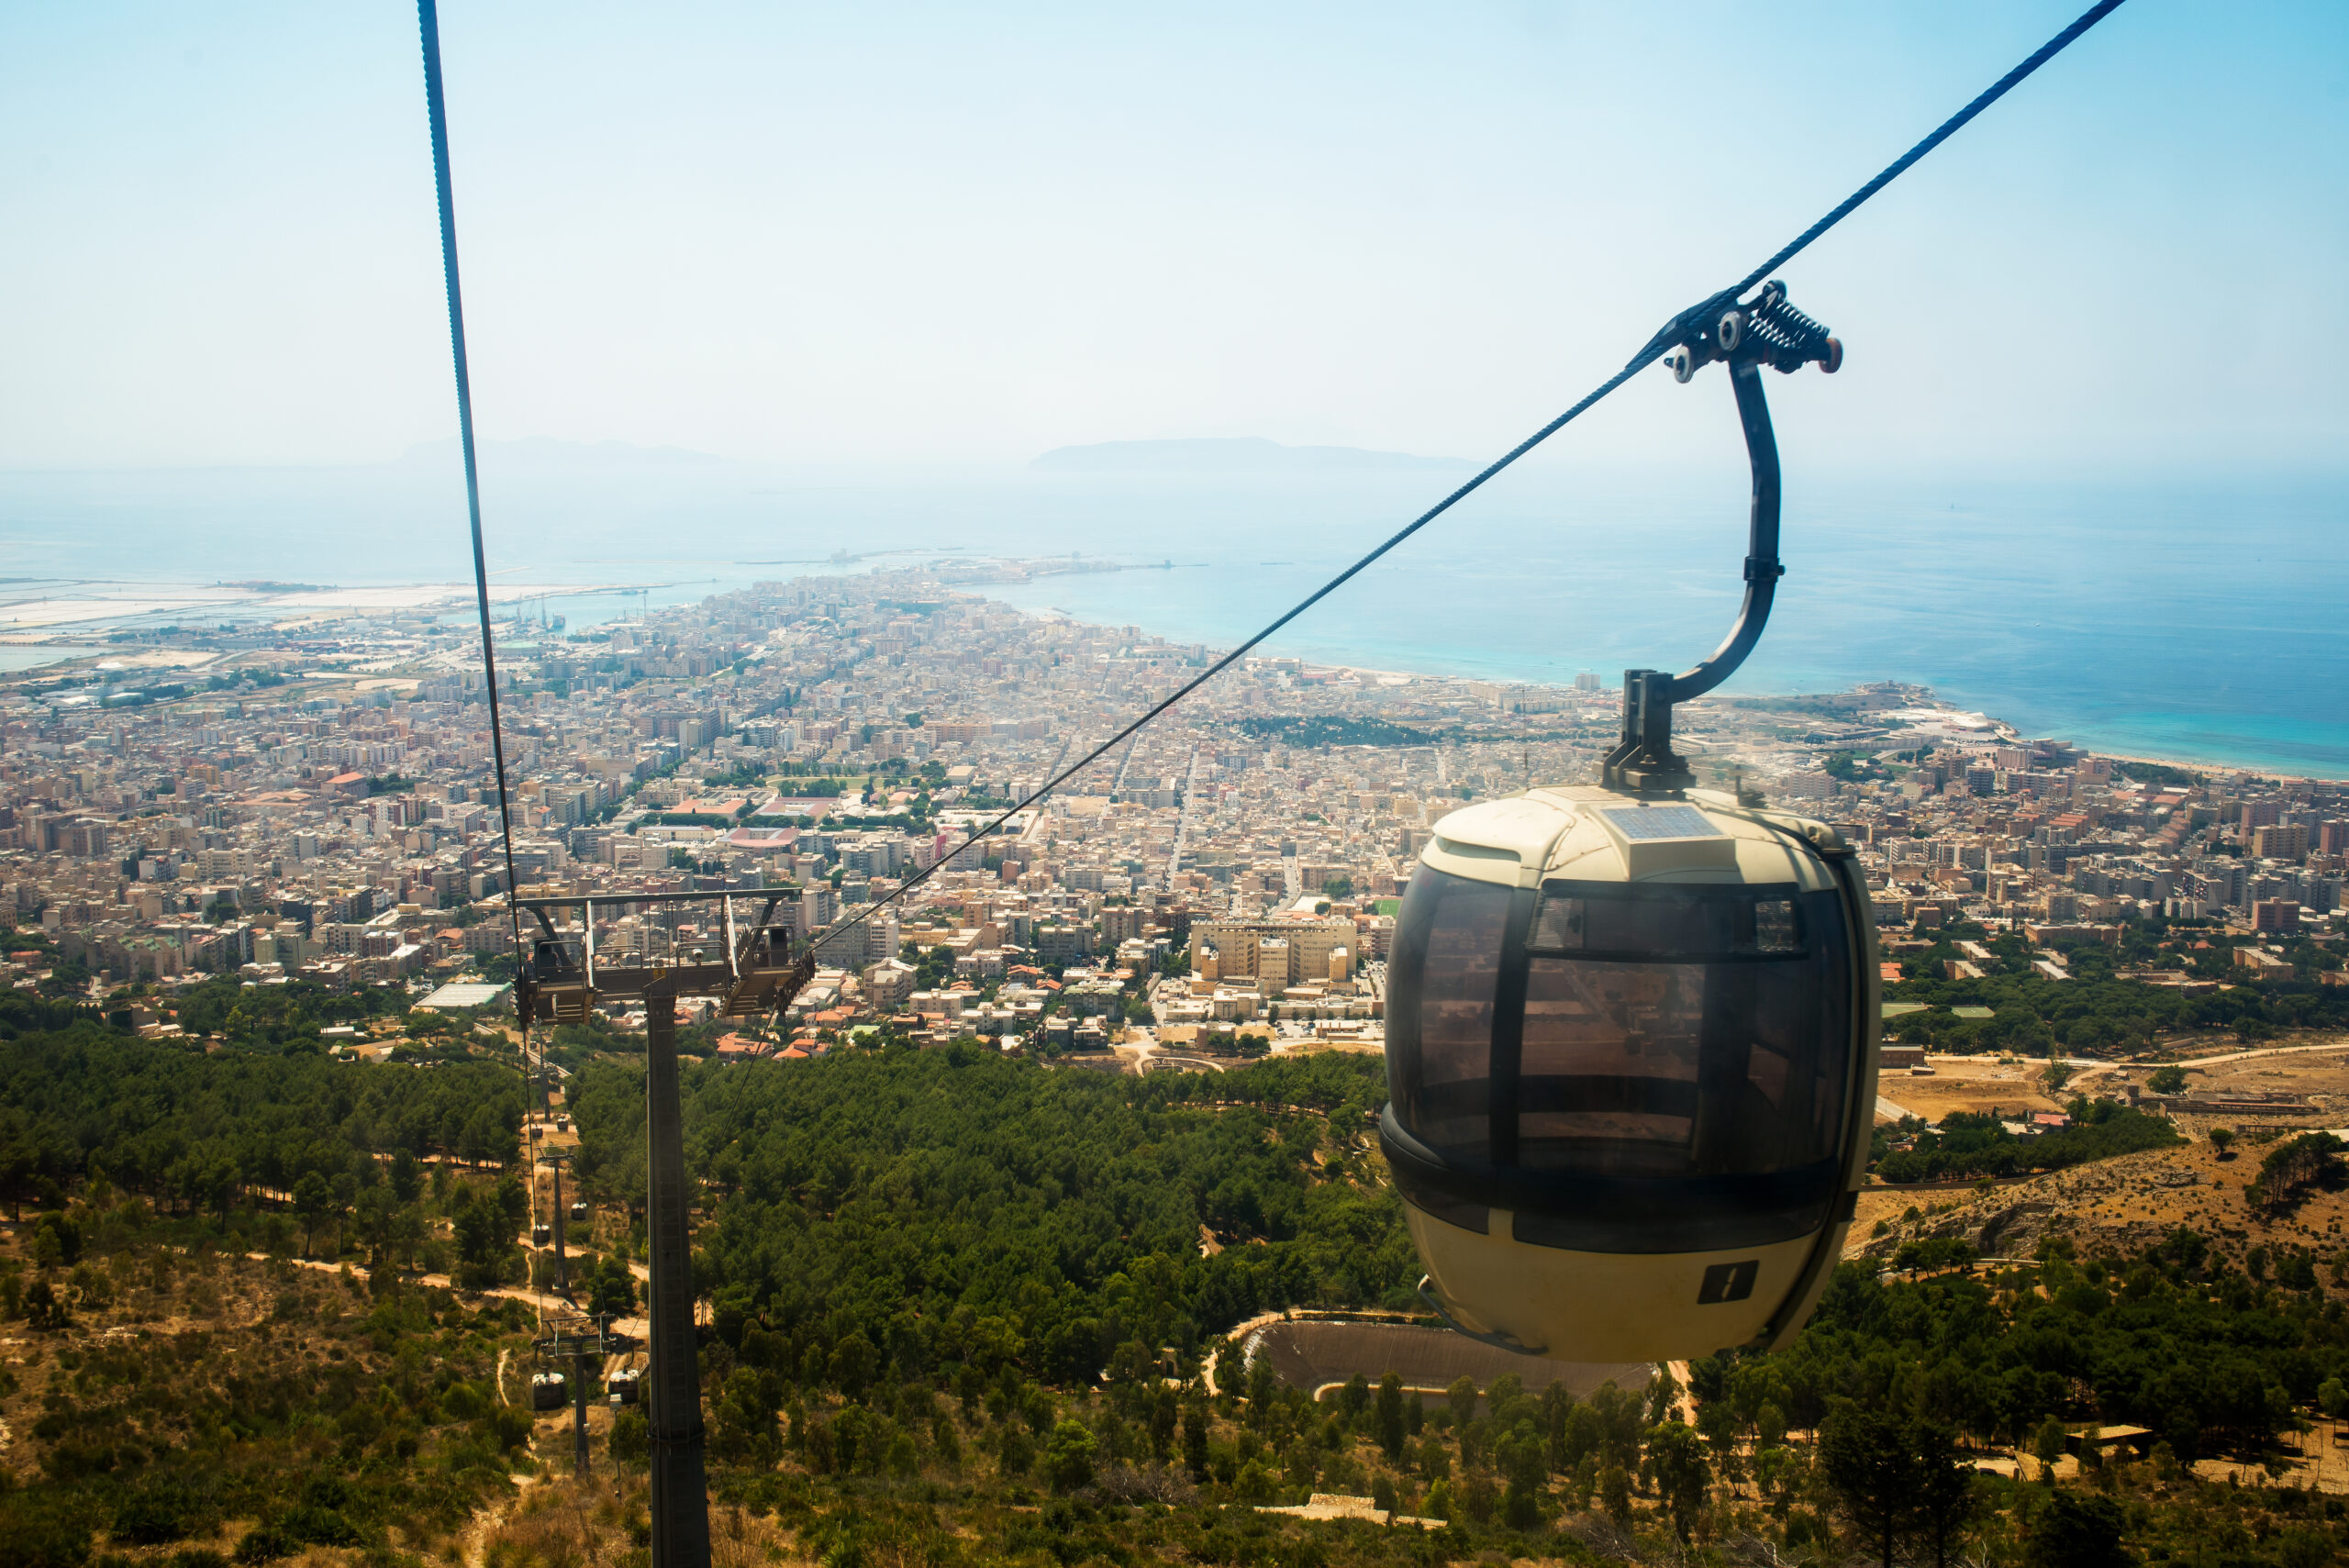 Erice, Italy - July 15, 2015: Landscape of Trapani city from the cableway of Erice.
Cable cars climb to the village of Erice.
The cableway is one of best mean to reach the summit of Erice village.
Erice, province of Trapani. Sicily, Italy.